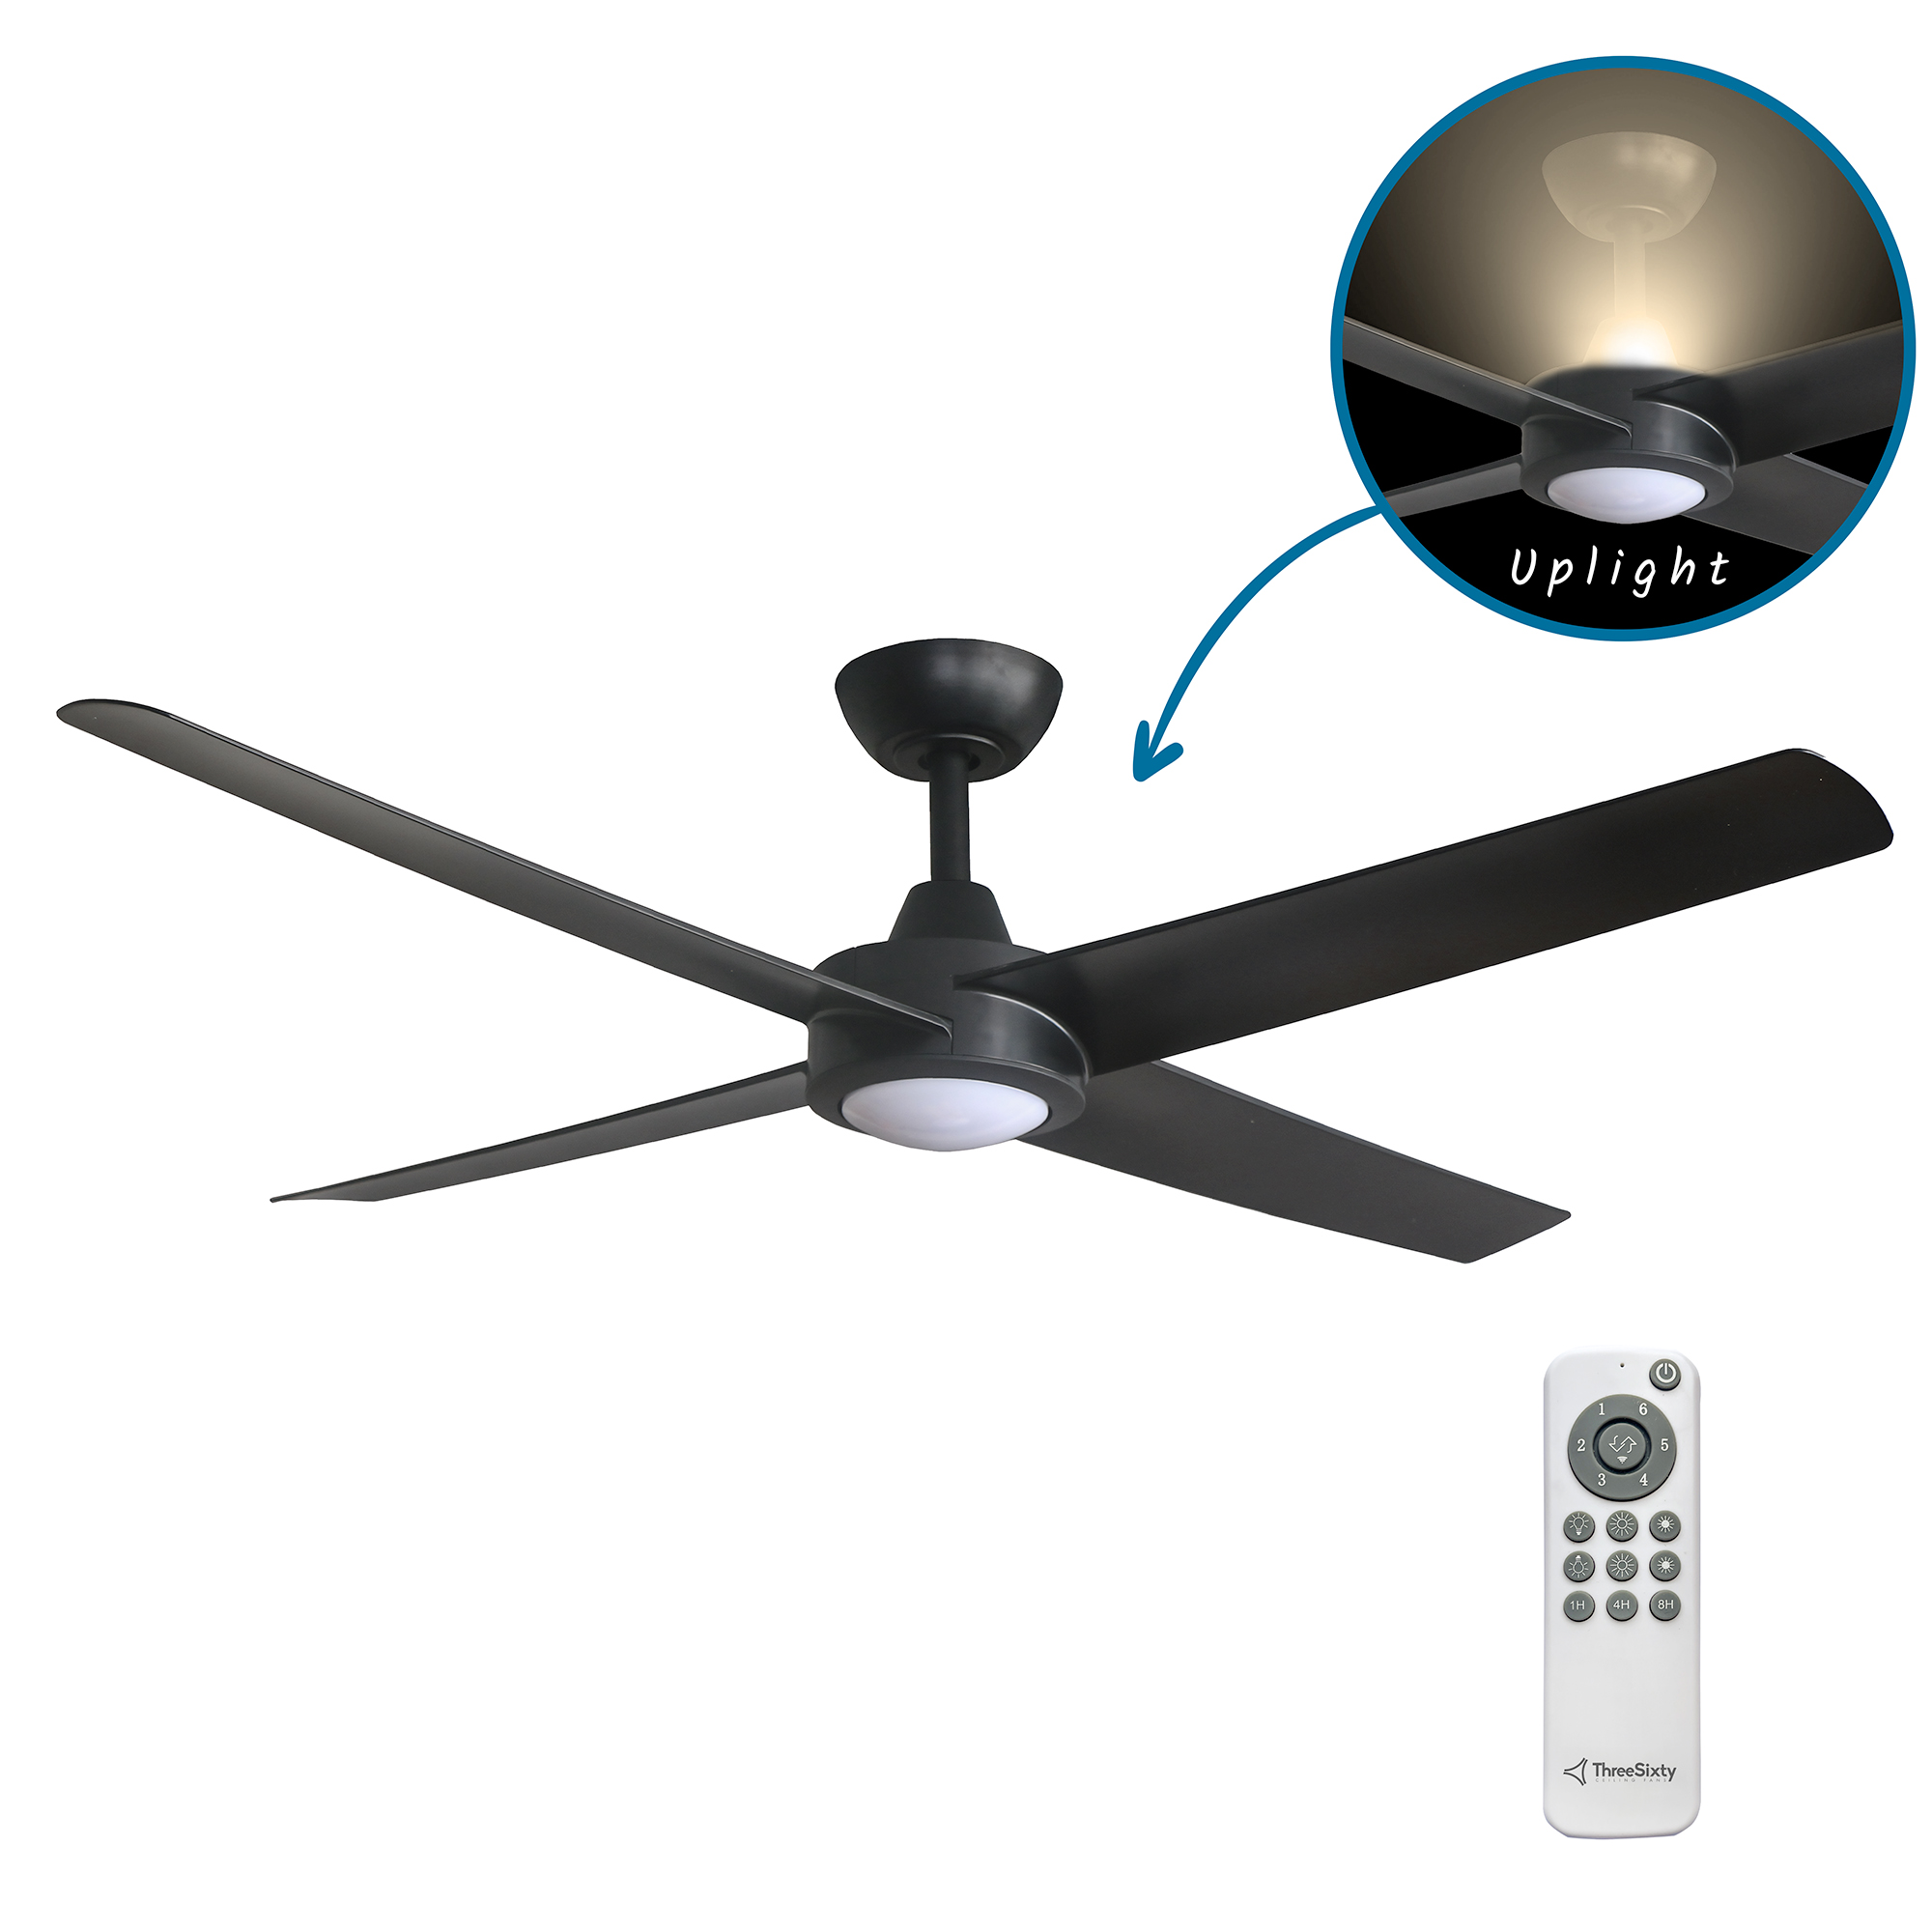 52" Ambience DC Ceiling Fan in Black with Built-in Uplight